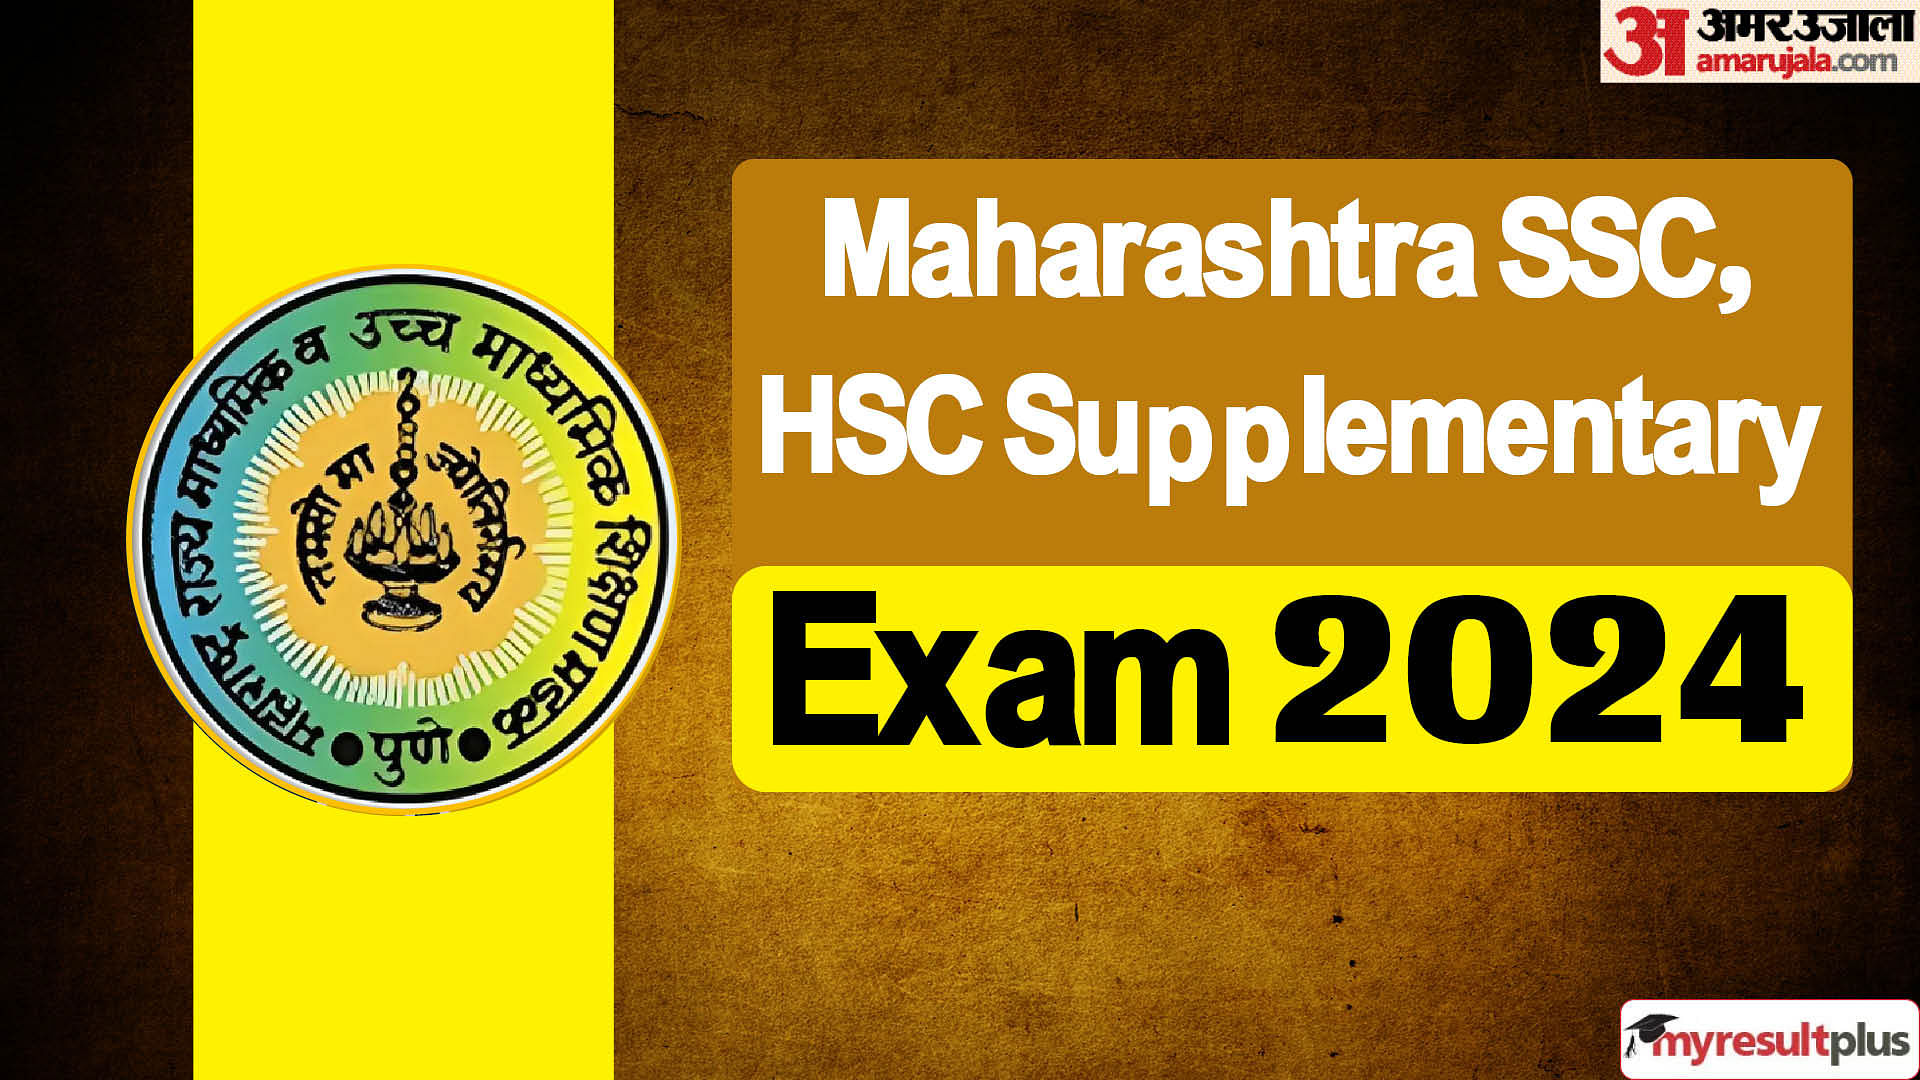 Maharashtra SSC, HSC Supplementary Exam 2024 Date sheet released; Exams from 16 July, Read here